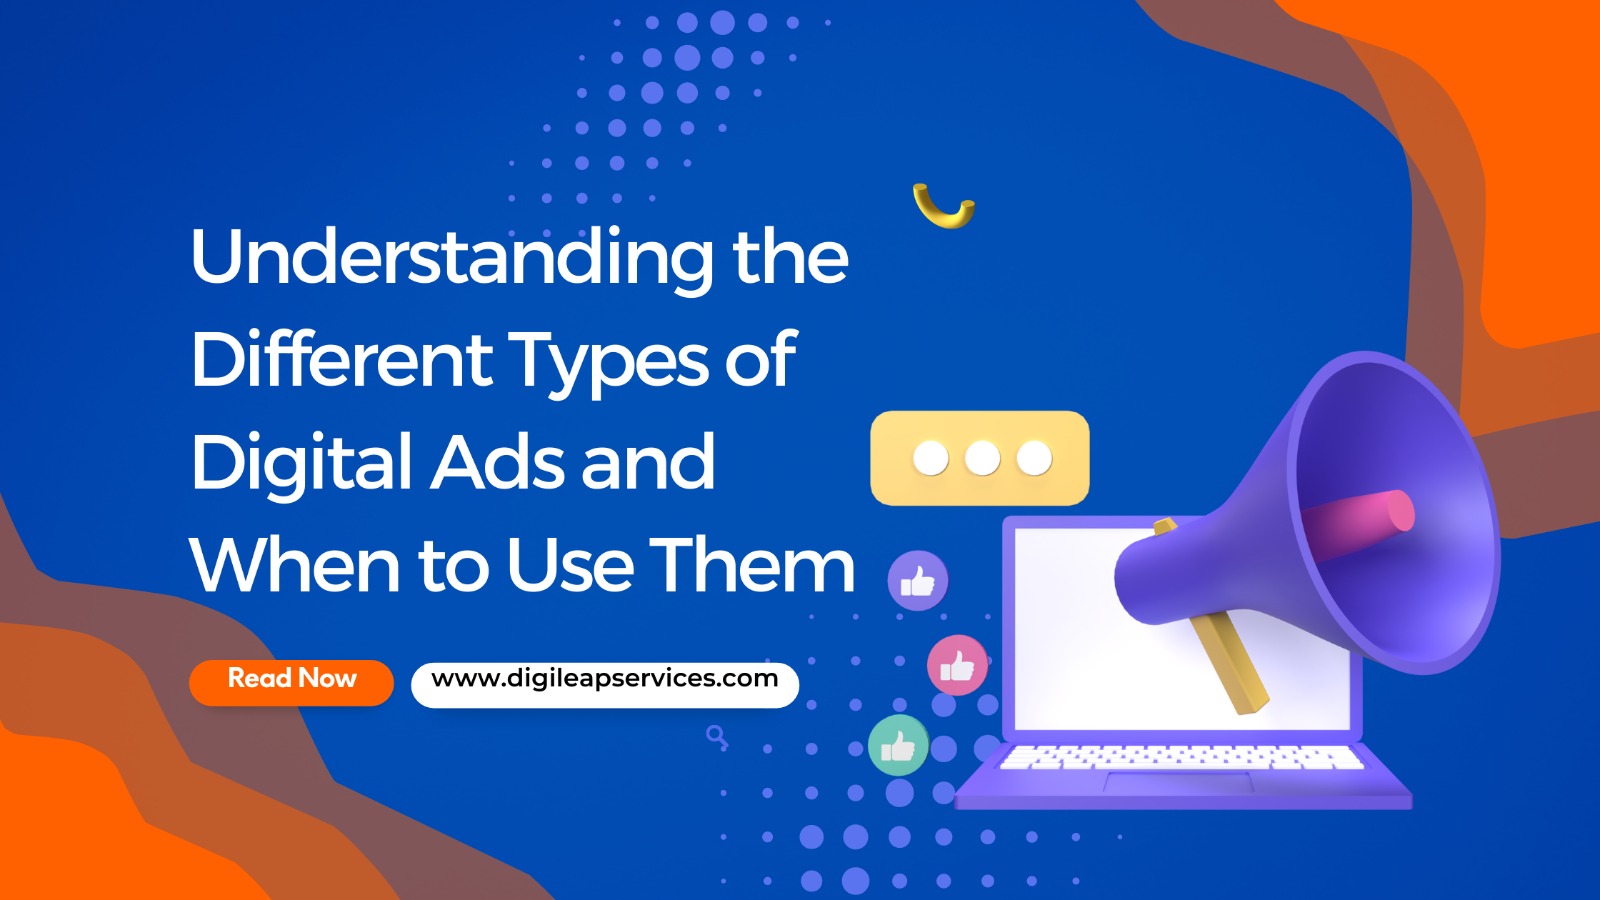 Understanding the Different Types of Digital Ads and When to Use Them